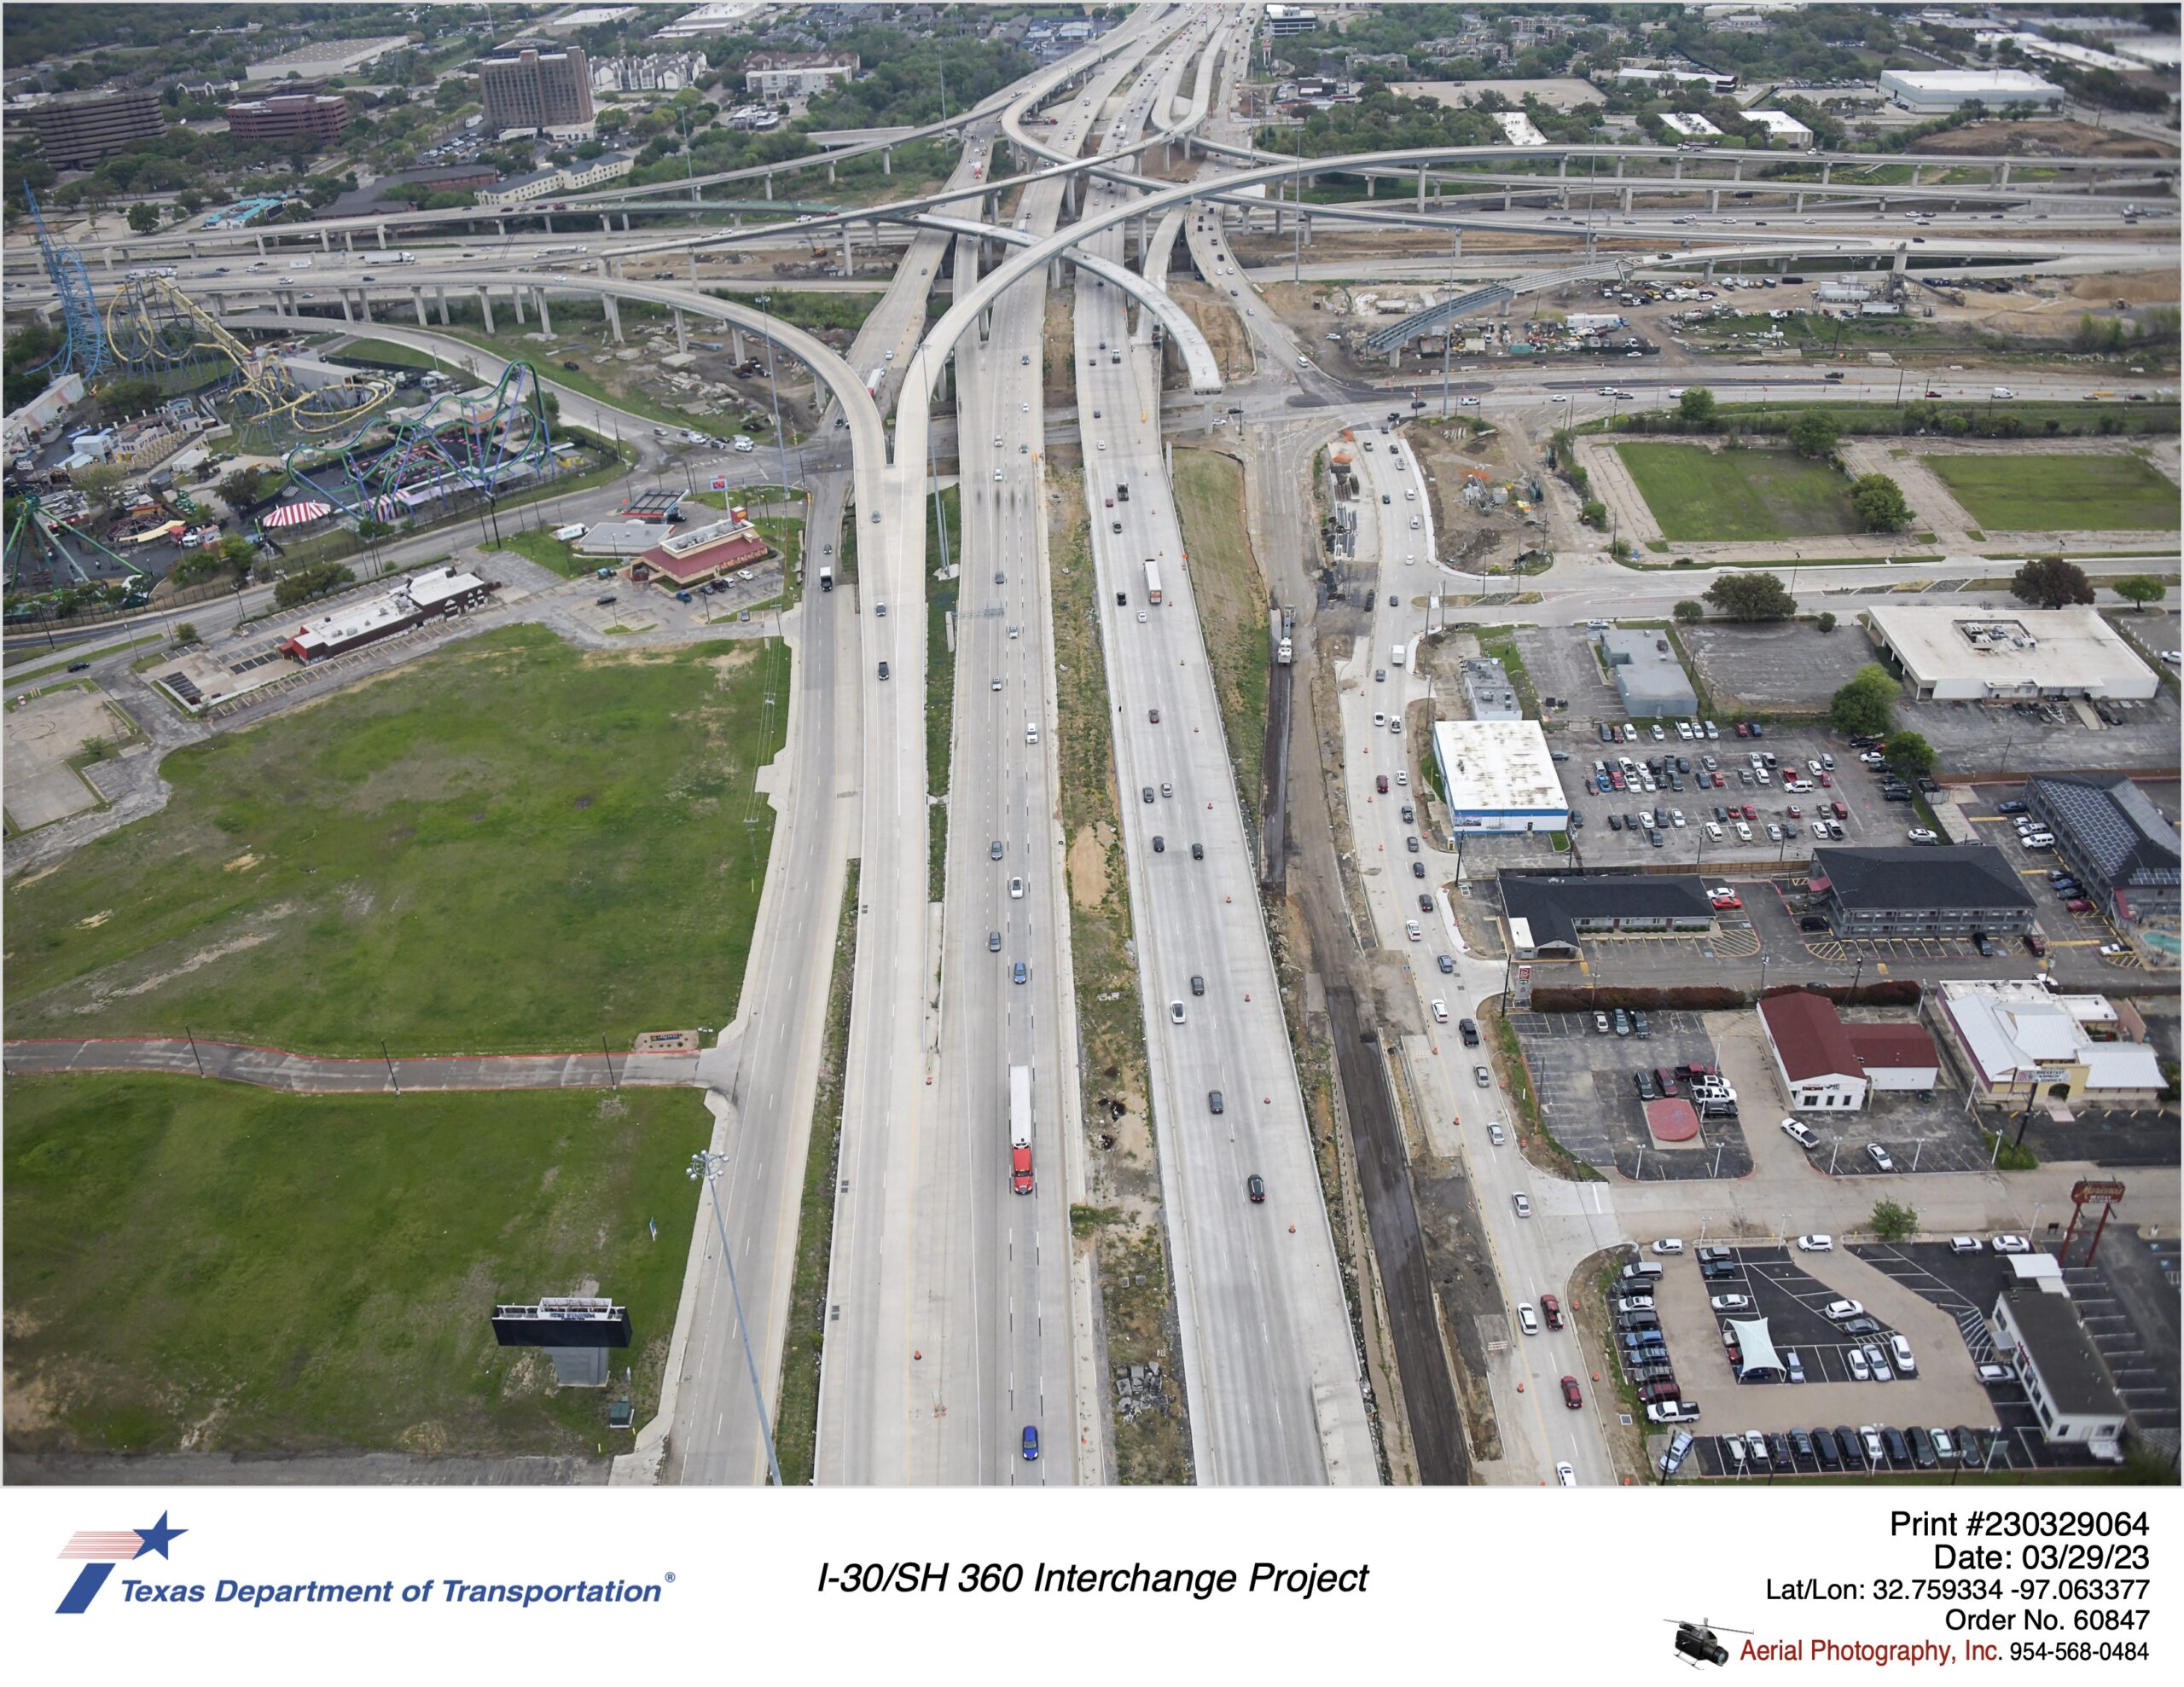 SH 360 looking north at I-30 interchange highlighting new northbound frontage road and removal of old frontage road. March 2023.